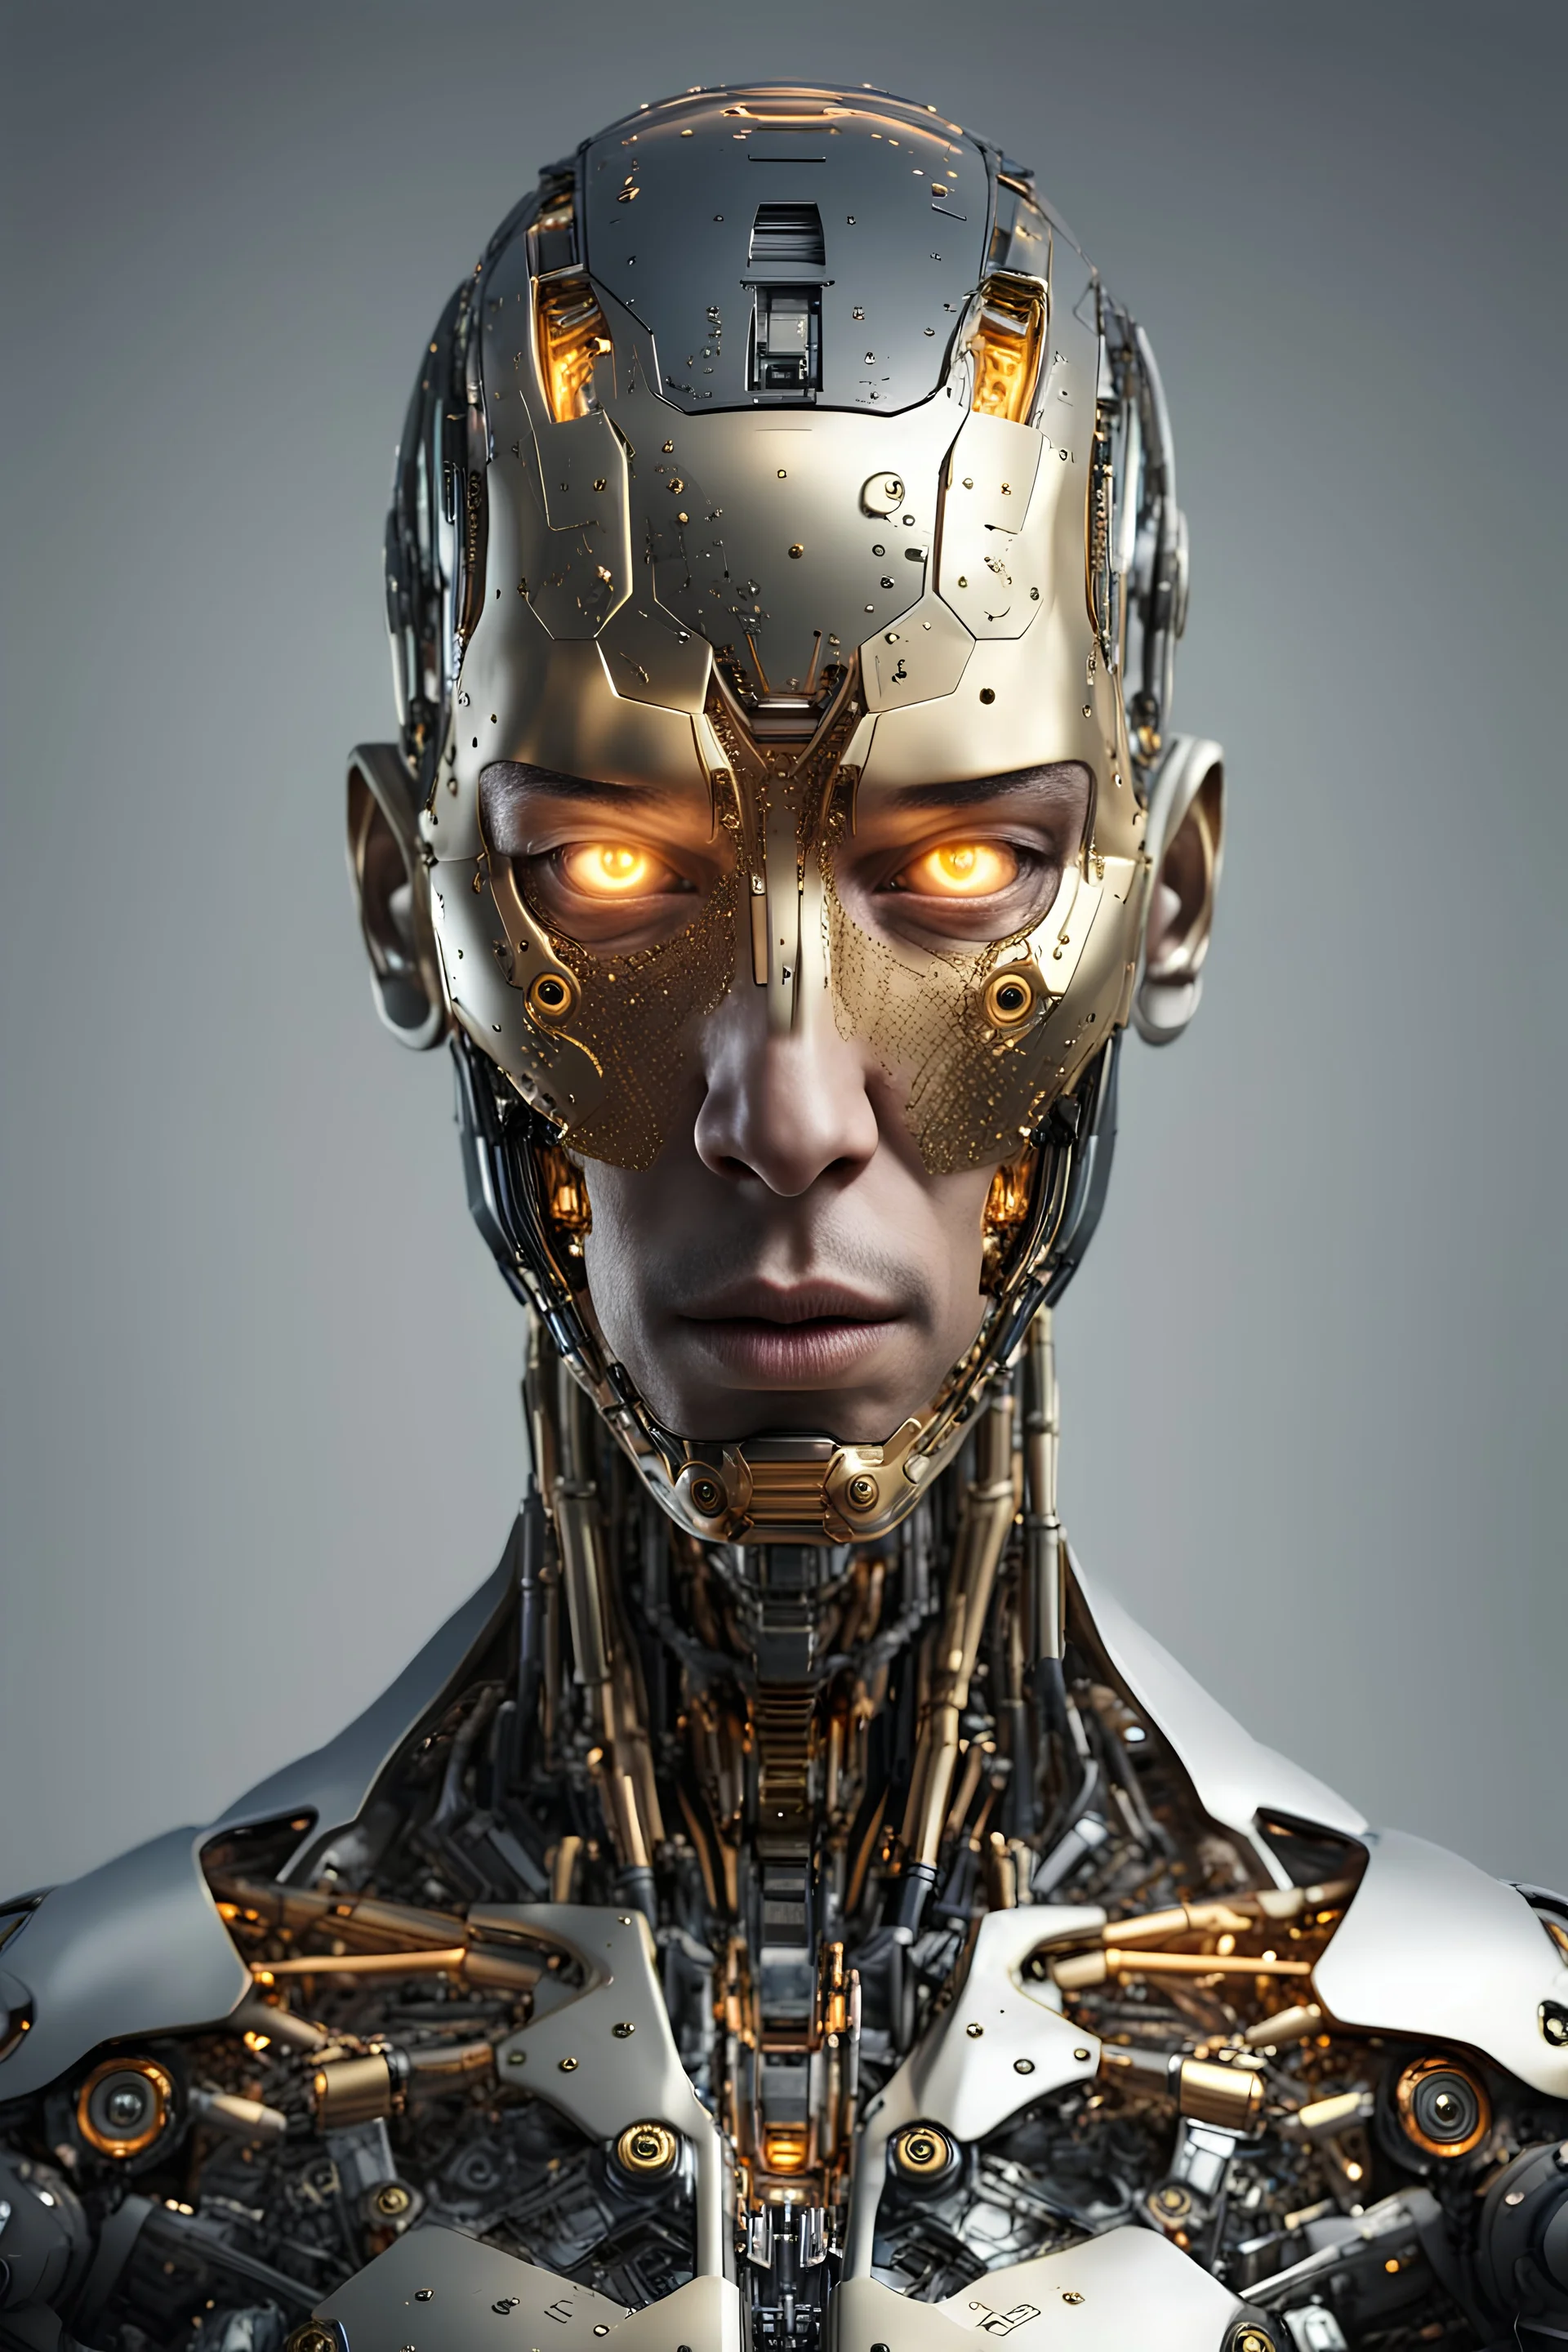 photorealistic, anatomically, physically correct full-length male body of an future AI cyborg. The face representing must be angry and the horror and beauty of future technology. The AI's cyborg golden glowing eyes somehow represent eyes like one of a human . The body features futuristic, intricate futuristic designs all across the robots body. Front view.